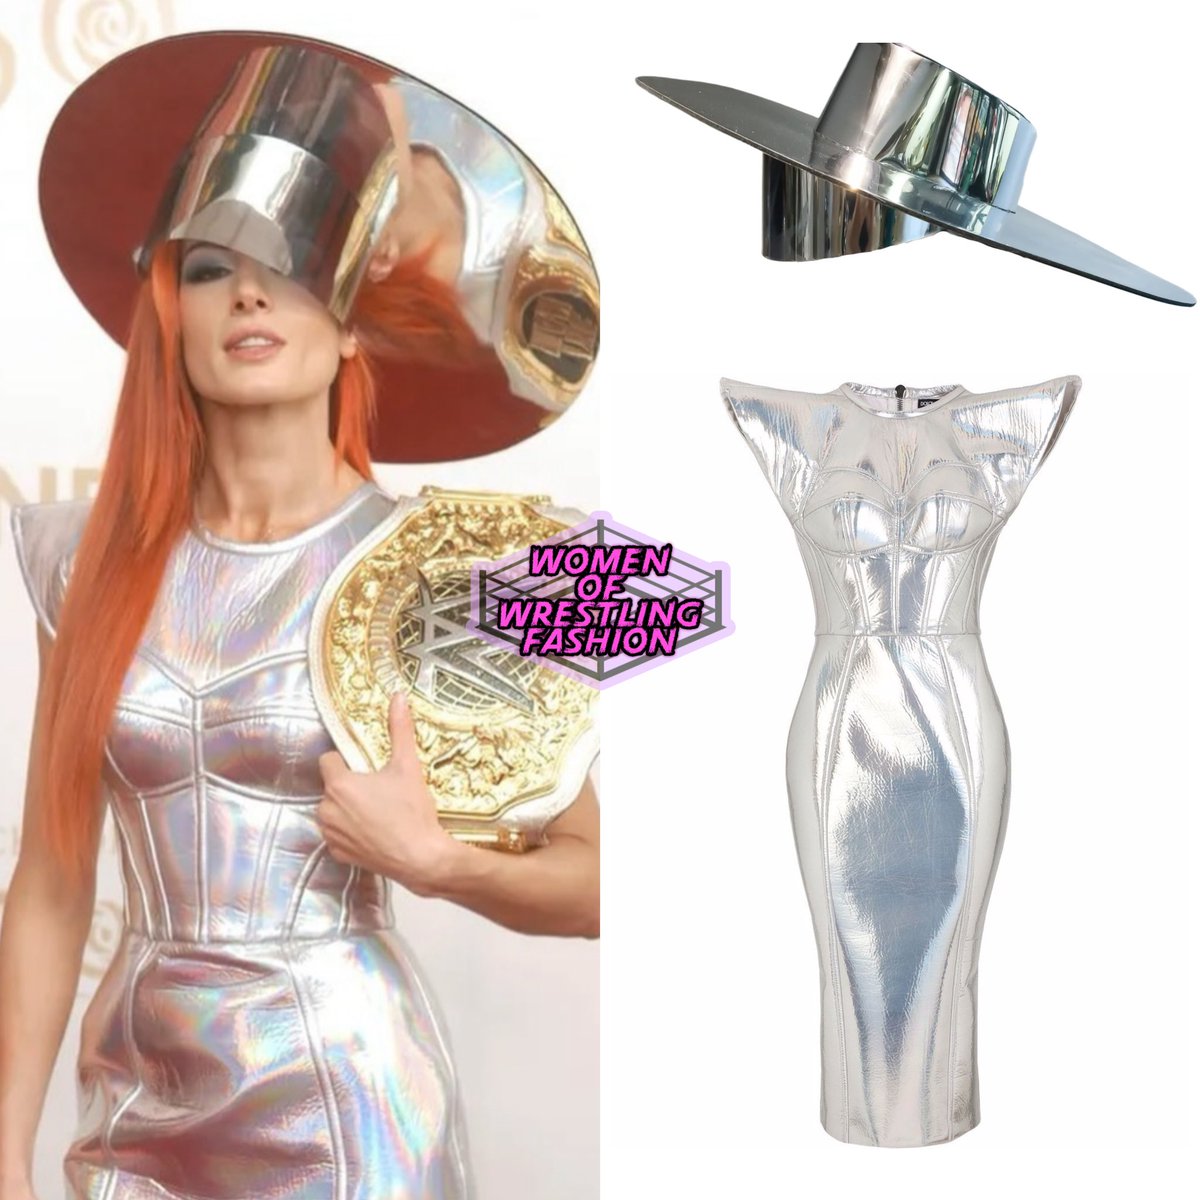 For the #KentuckyDerby, @BeckyLynchWWE wore the Asymmetric Futuristic Chrome Zorro Hat from #DivampCouture ($1,318) & Metallic-Effect Bustier Dress from #DolceGabbana ($1,609 - on sale)